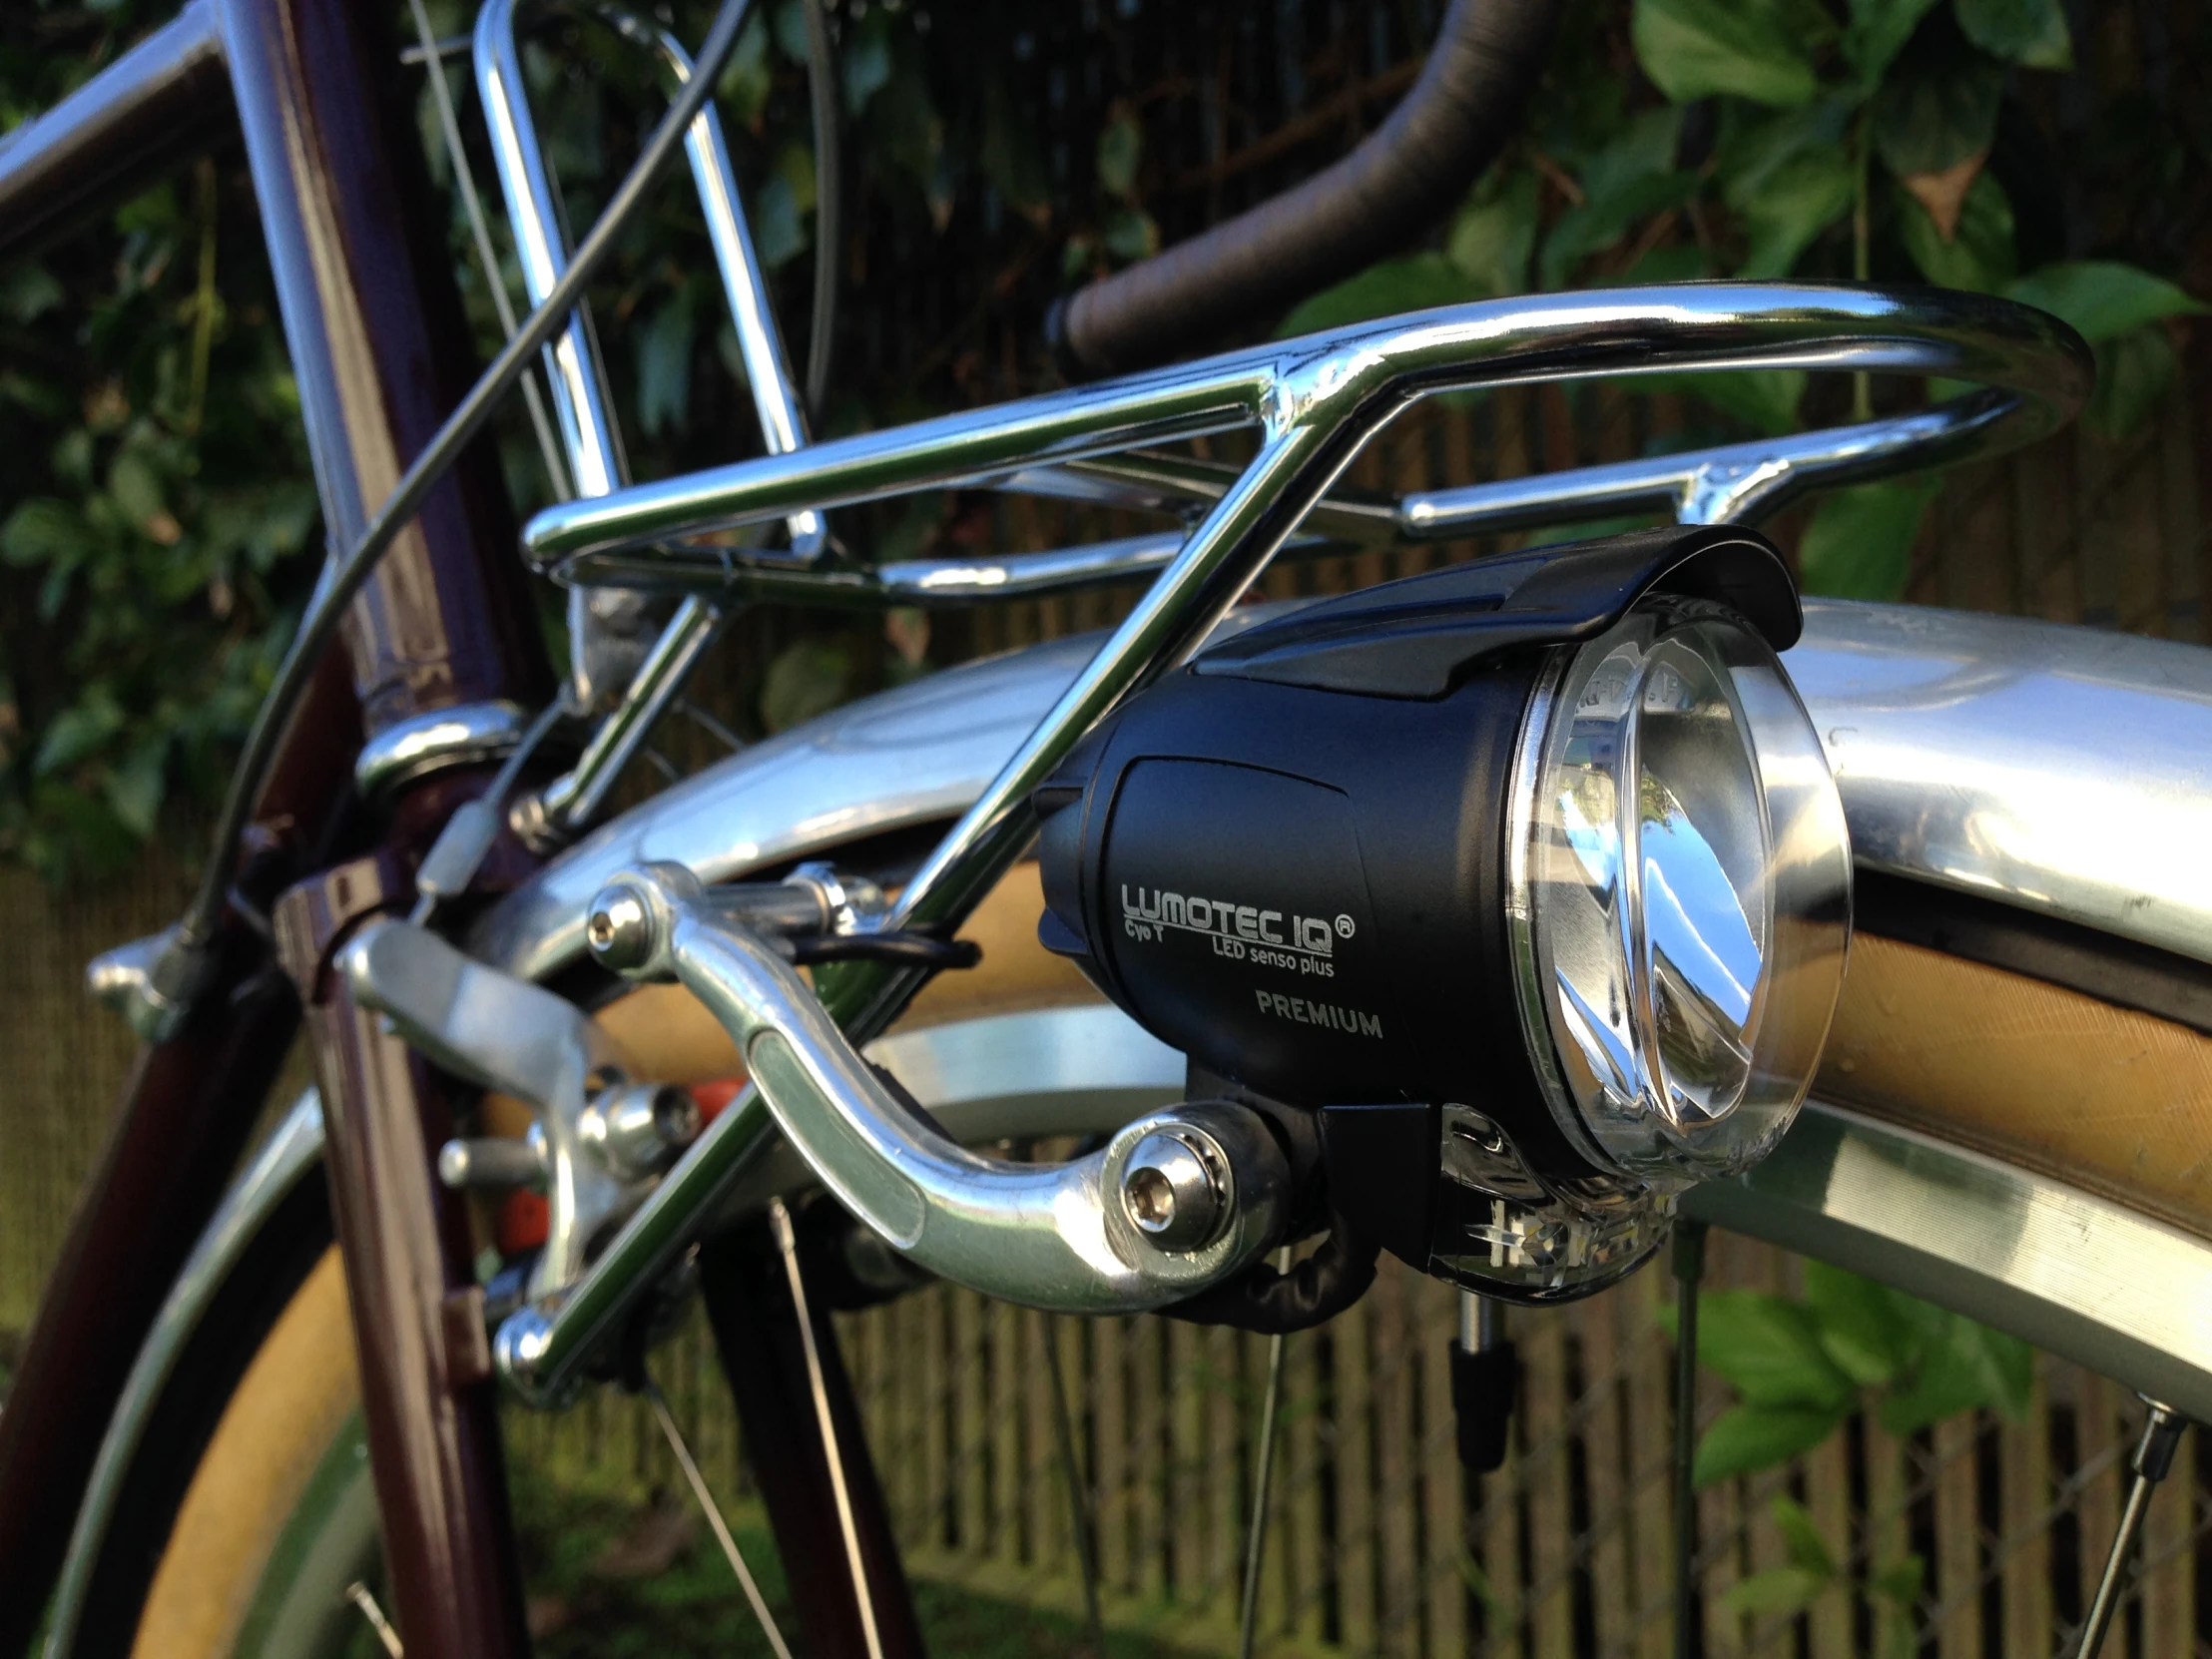 the front light is attached to the bike's handlebars